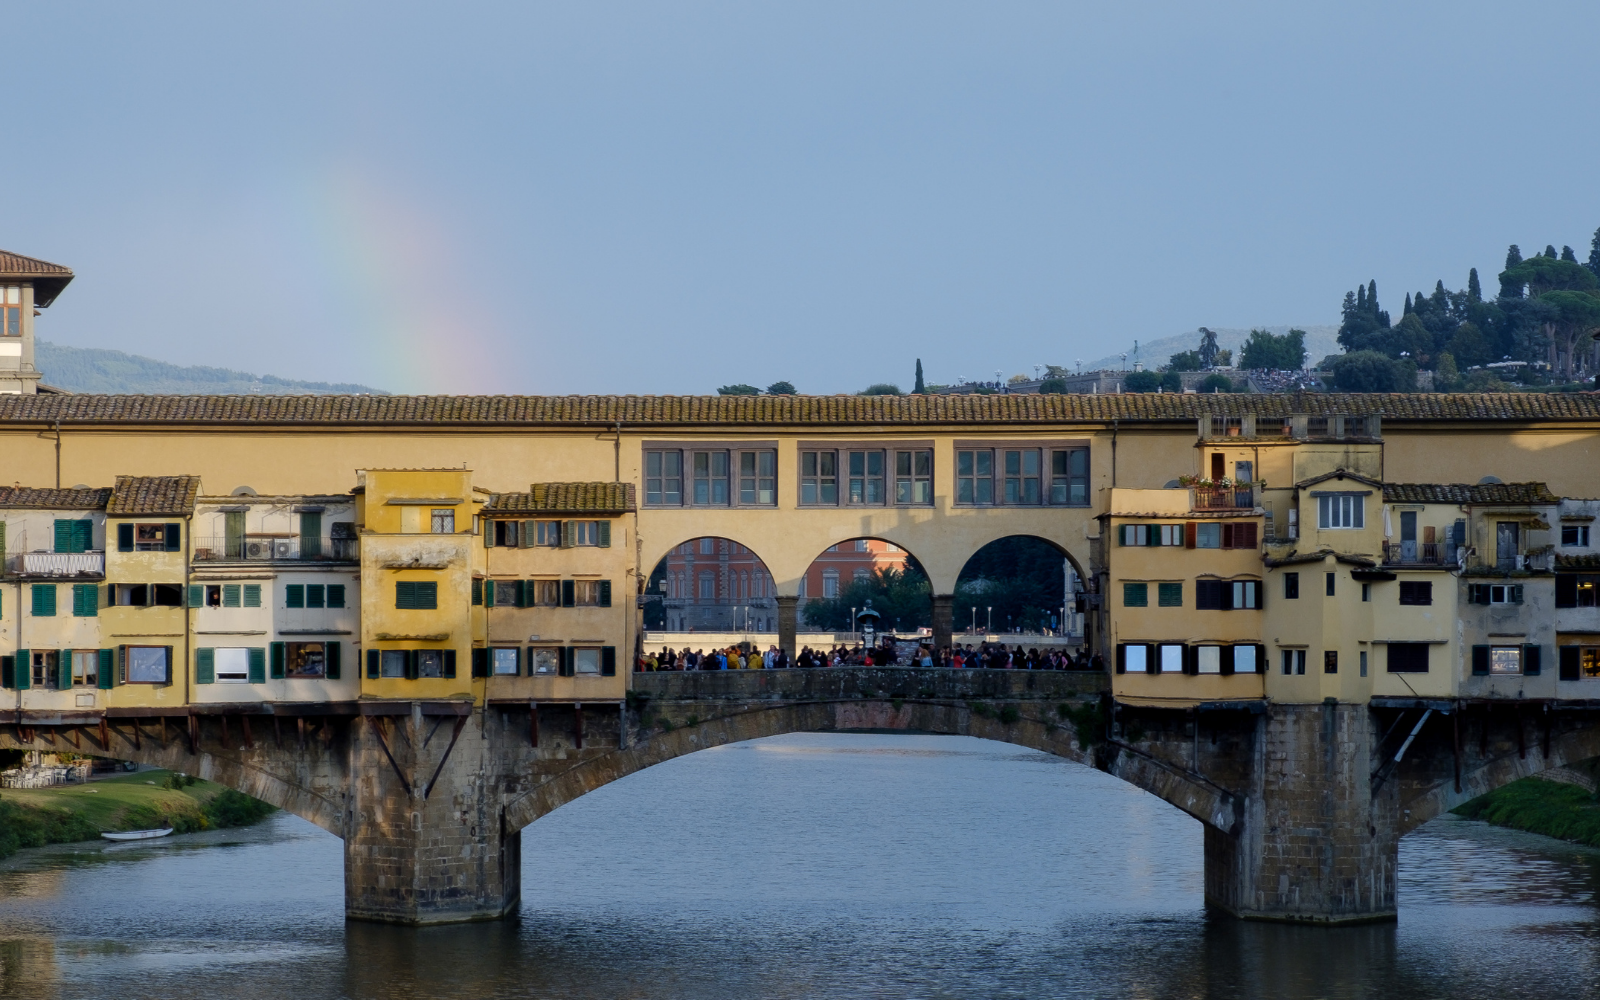 Florence with a beautiful rainbow